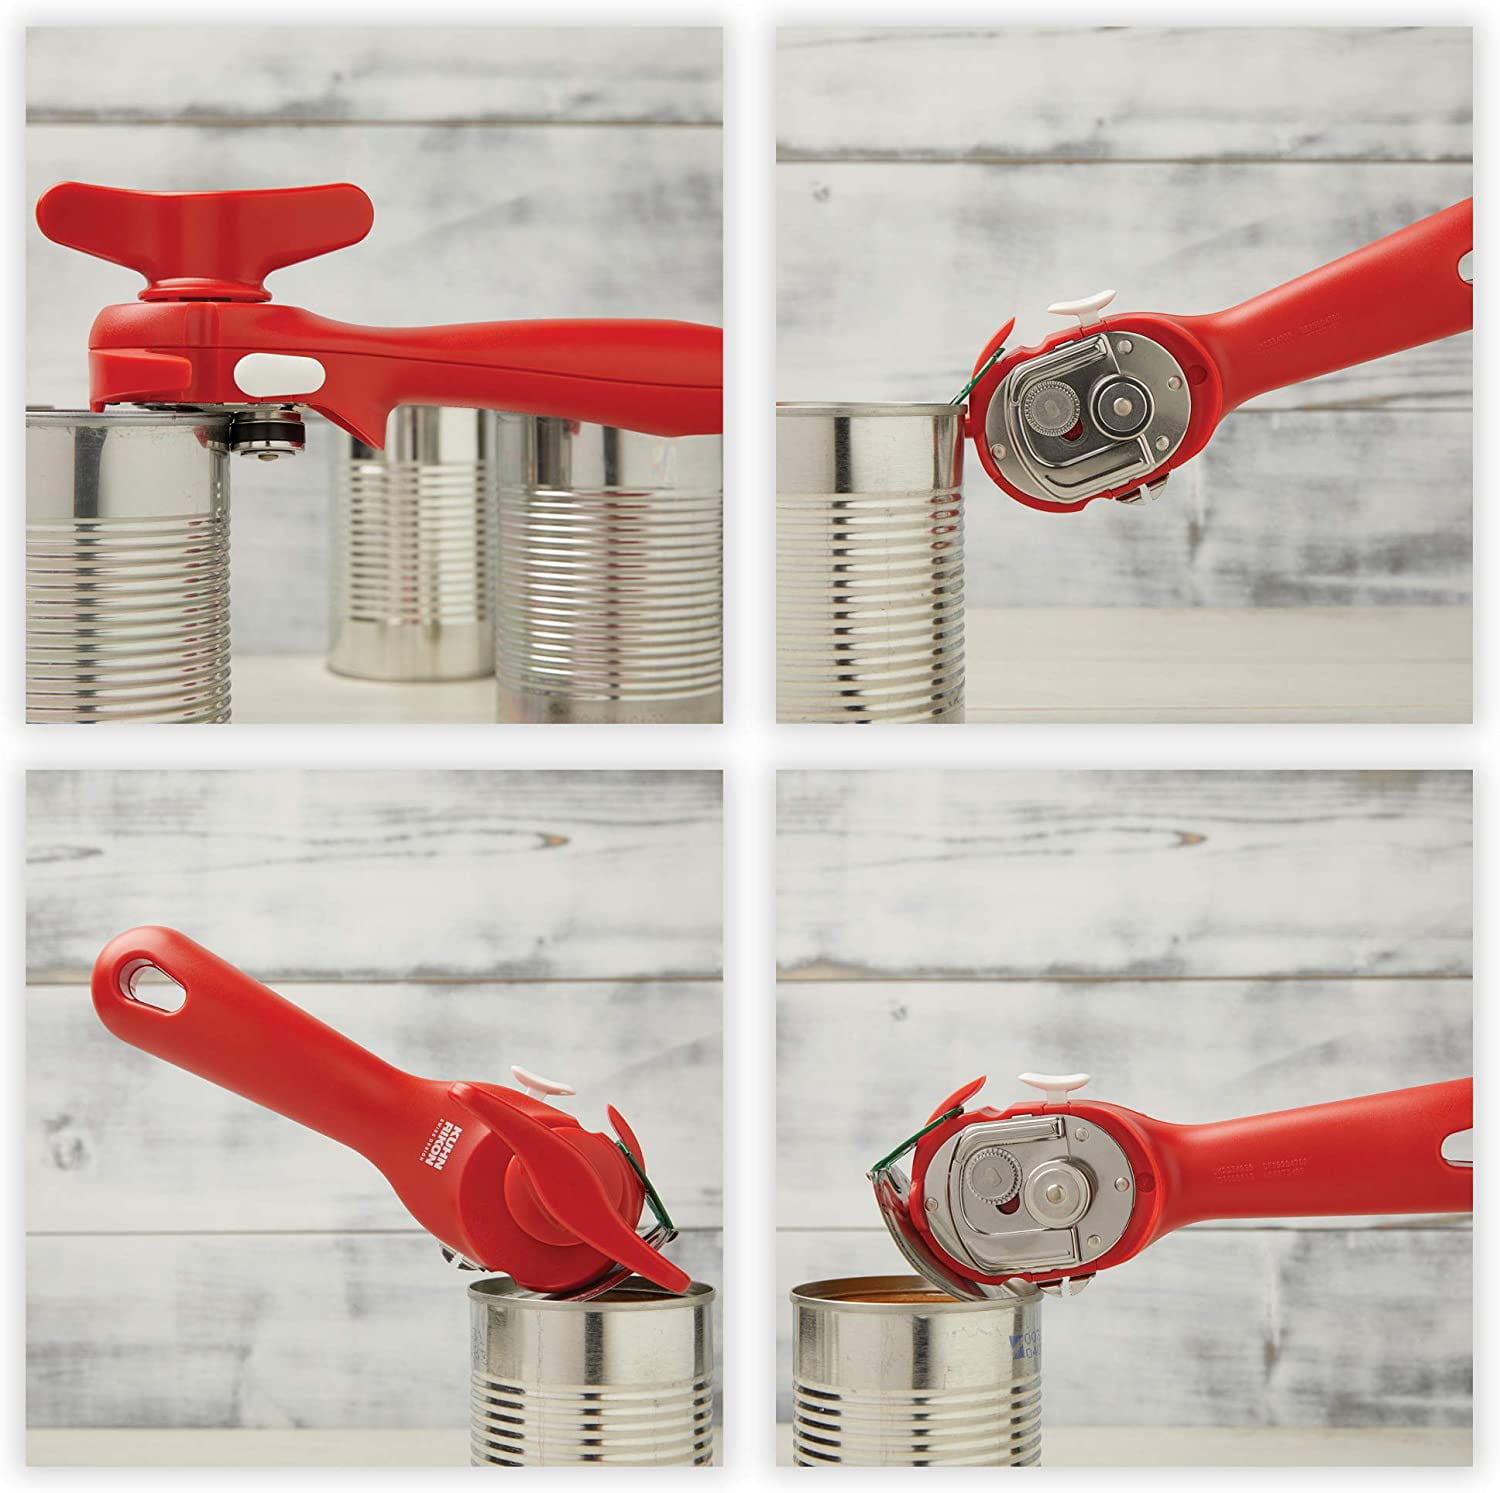 Kuhn Rikon Auto Safety LidLifter/Can Opener with Ring-Pull, 8 x